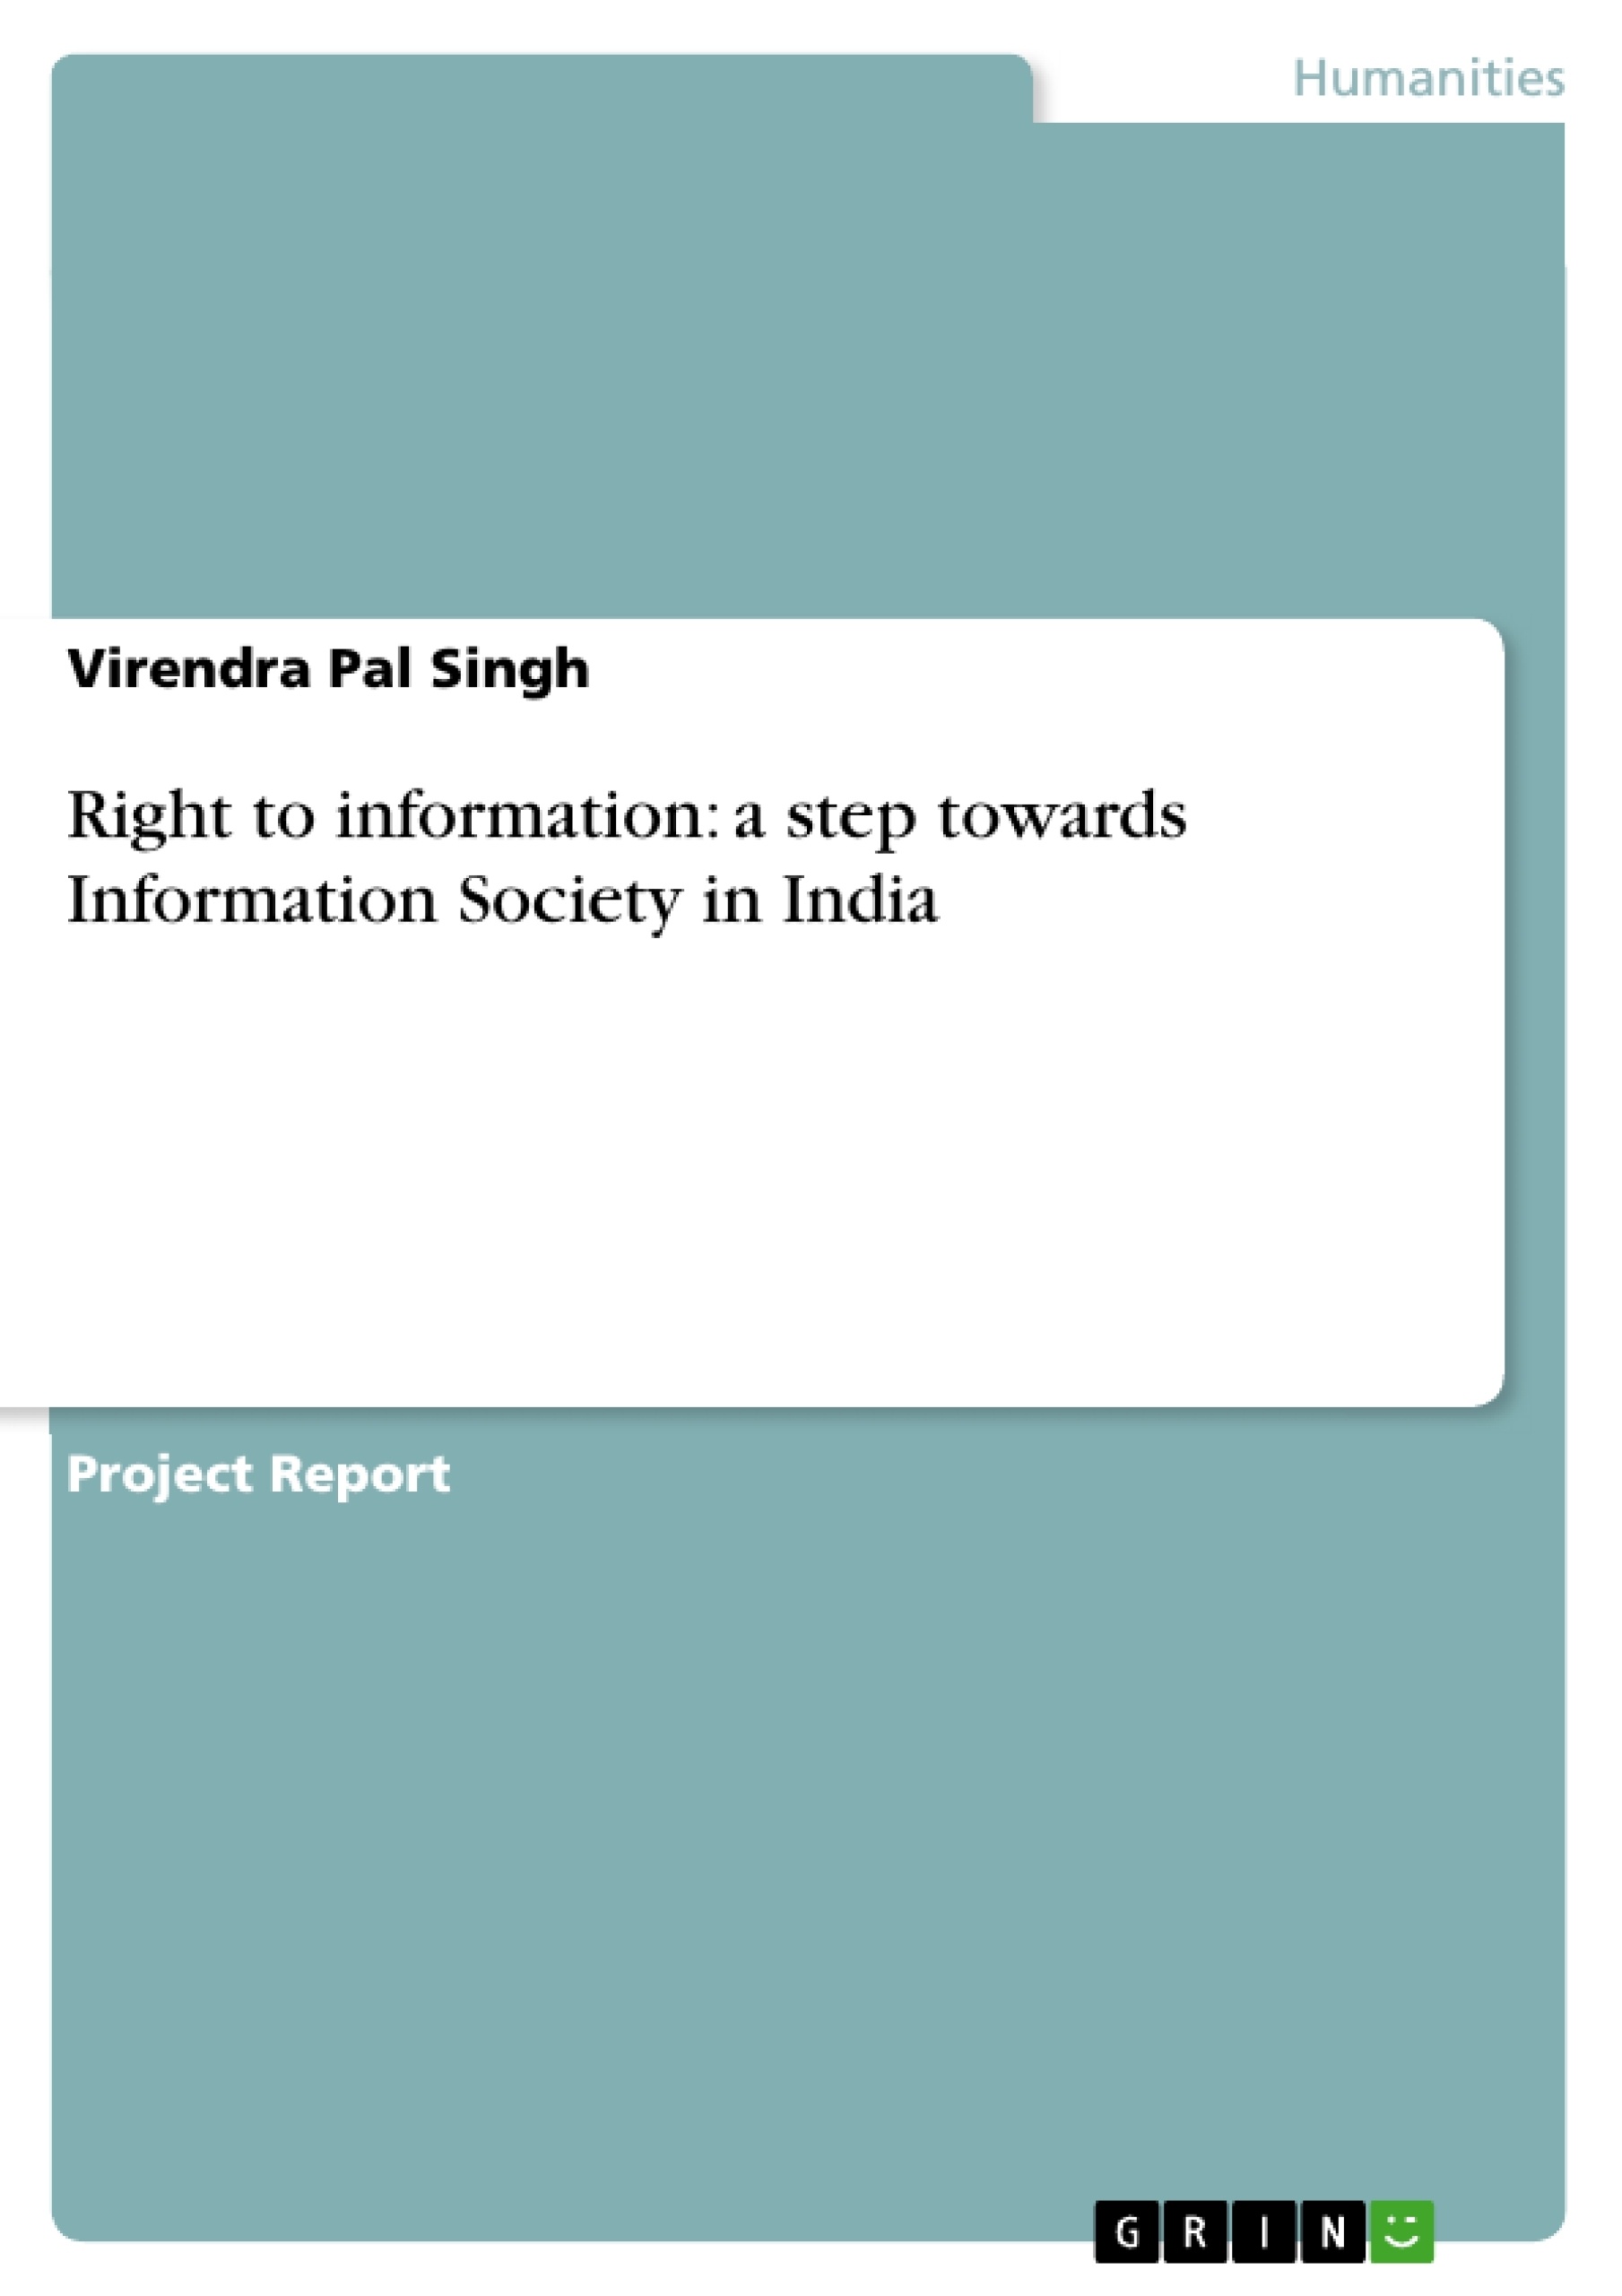 Title: Right to information: a step towards Information Society in India